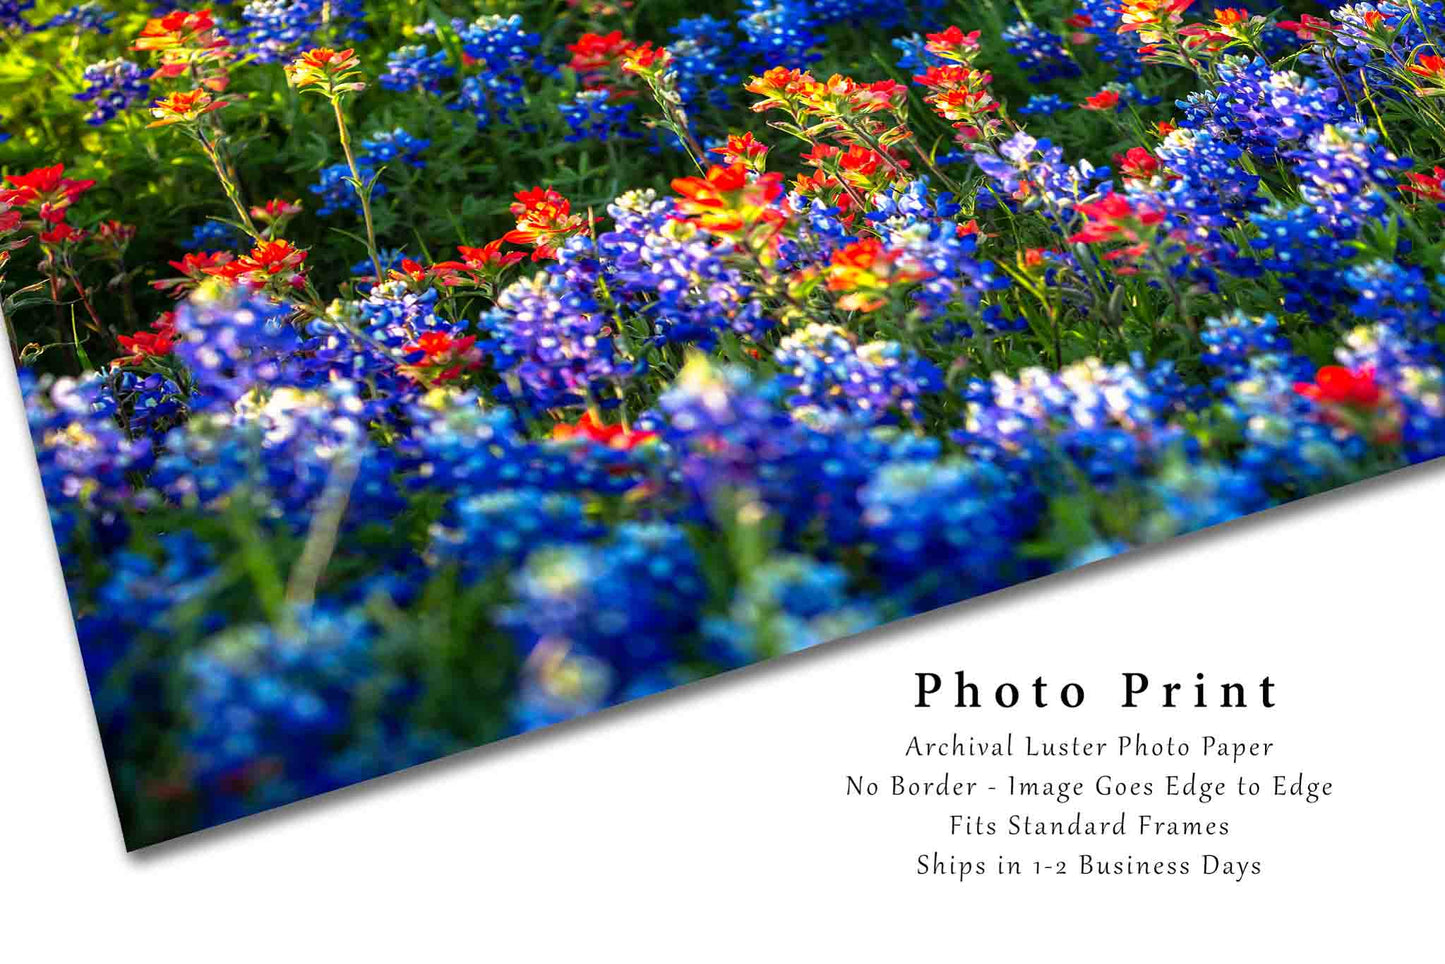 Wildflower Photography Print | Bluebonnets and Indian Paintbrush Picture | Texas Wall Art | Flower Photo | Floral Decor | Not Framed